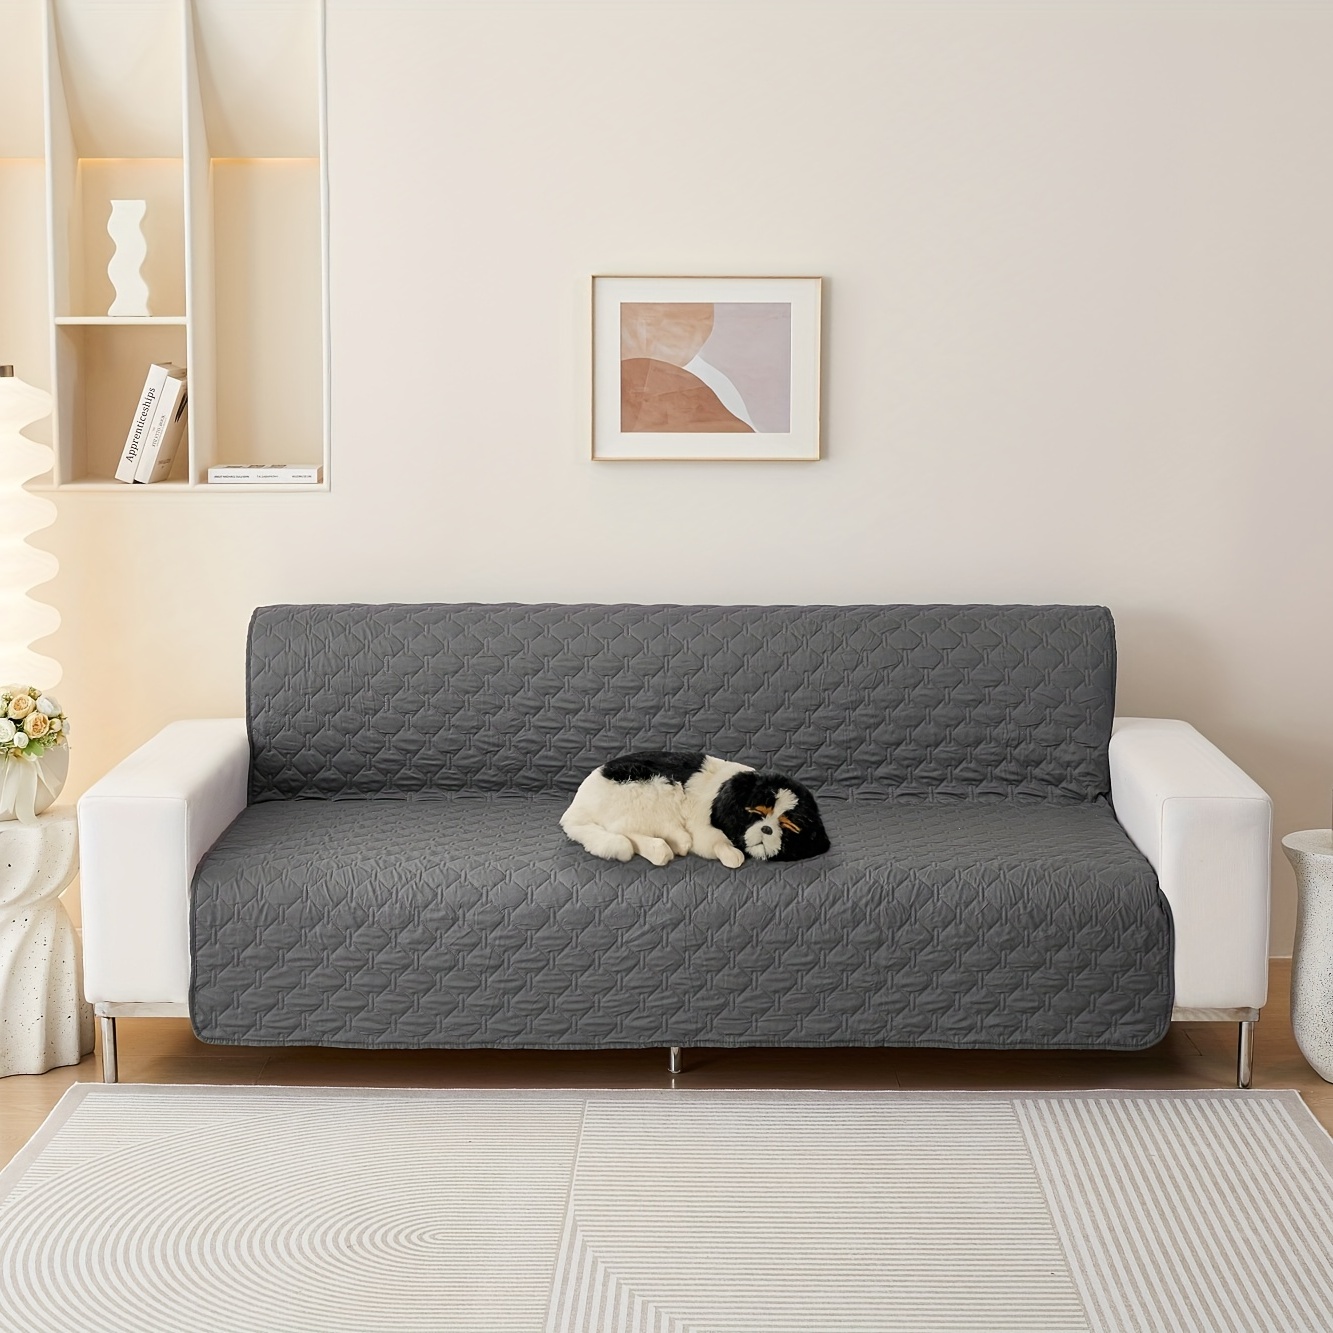 Pet Bed & Car Seat & Couch Cover